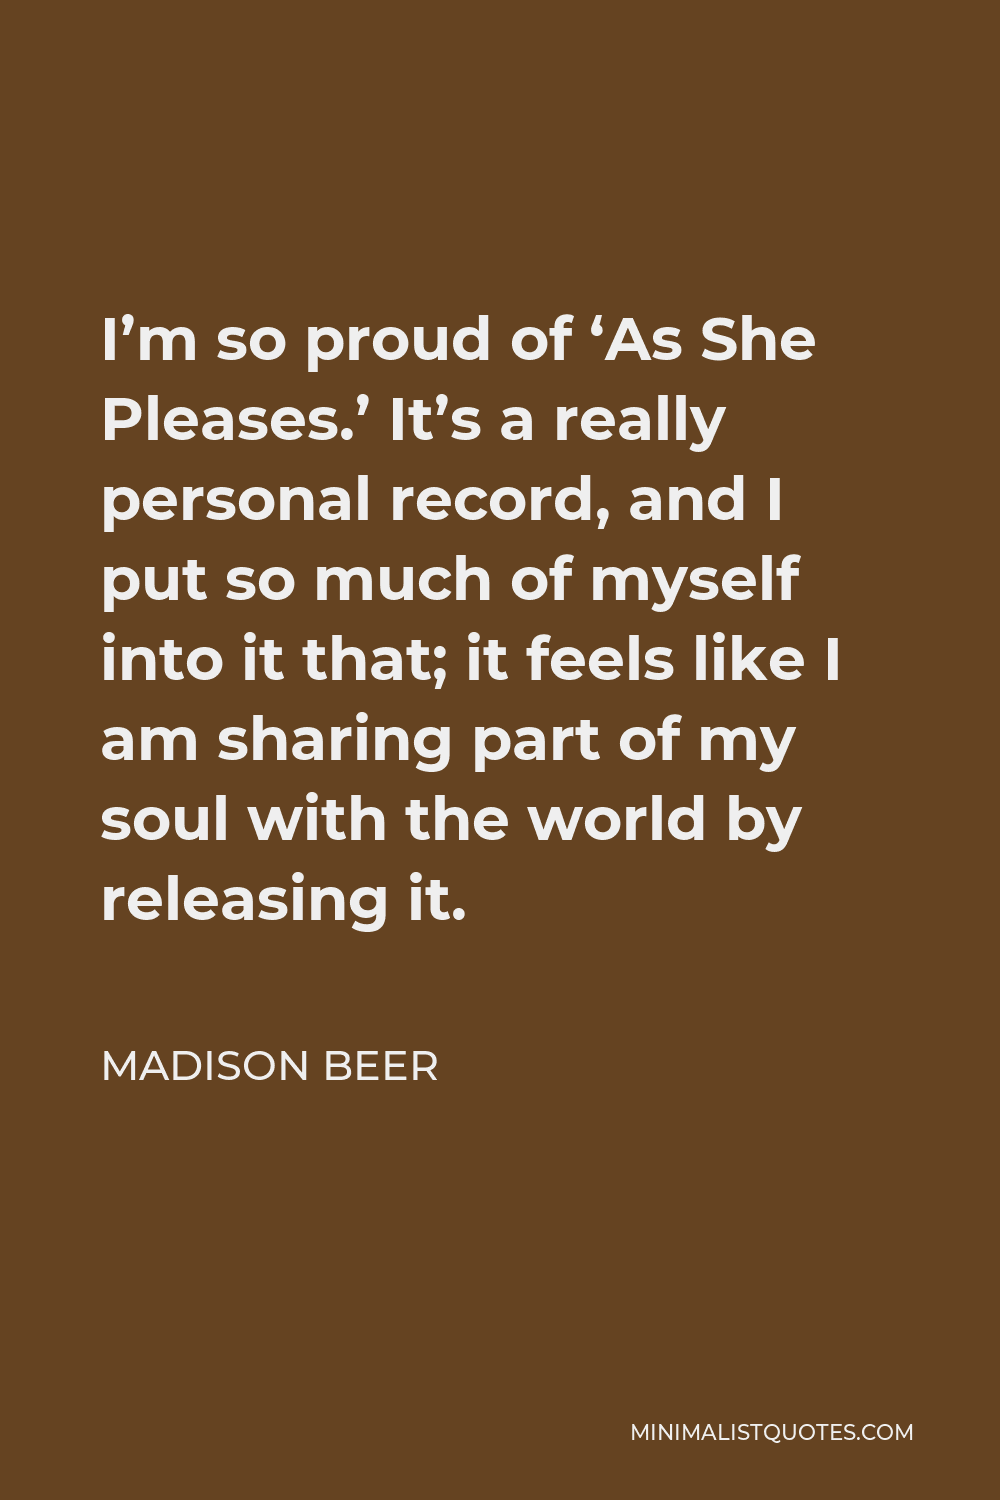 Madison Beer Quote - I’m so proud of ‘As She Pleases.’ It’s a really personal record, and I put so much of myself into it that; it feels like I am sharing part of my soul with the world by releasing it.